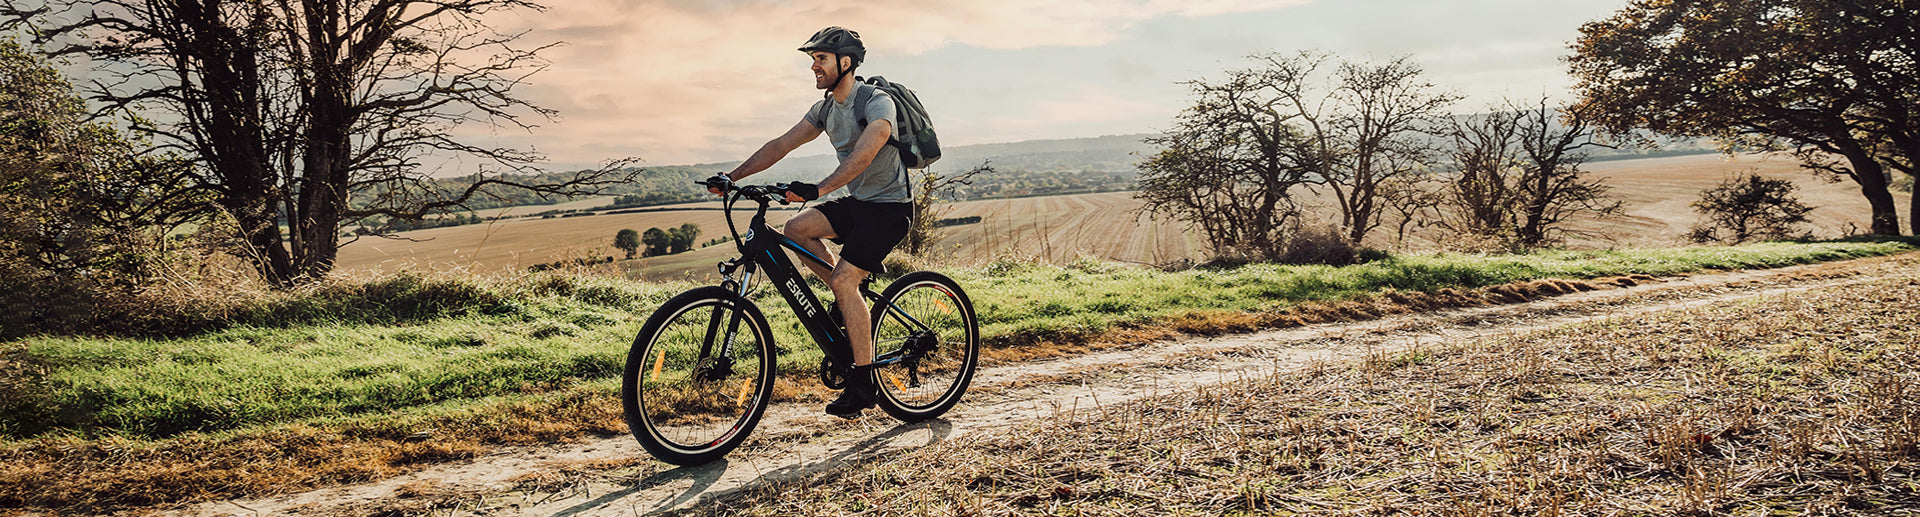 A man is riding an electric bike in the wild or countryside